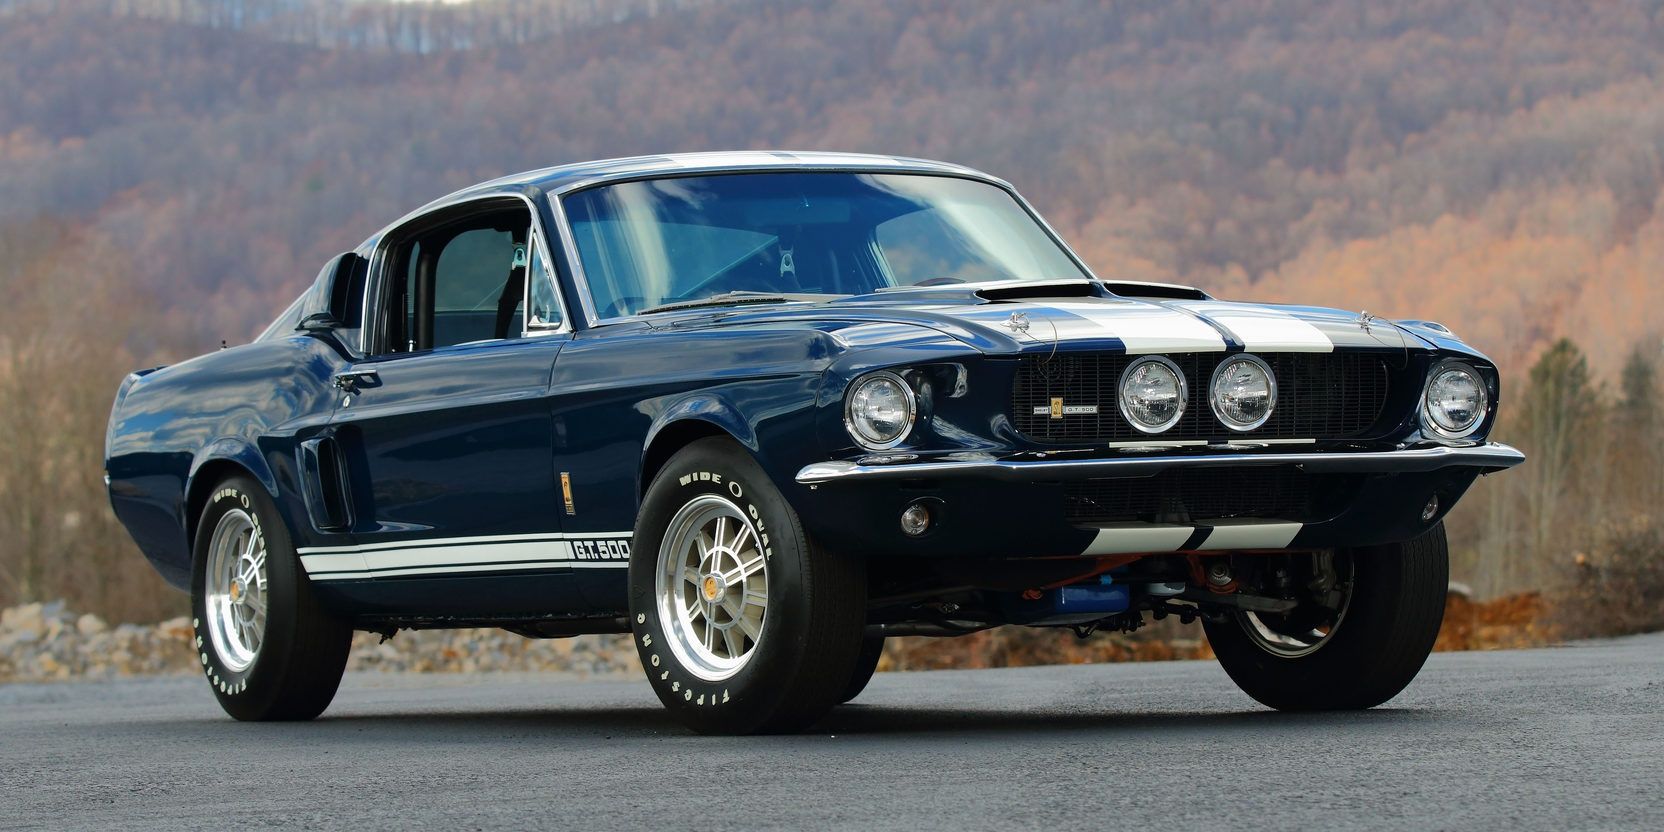 Ranking The 10 Best Ford Mustangs of All Time